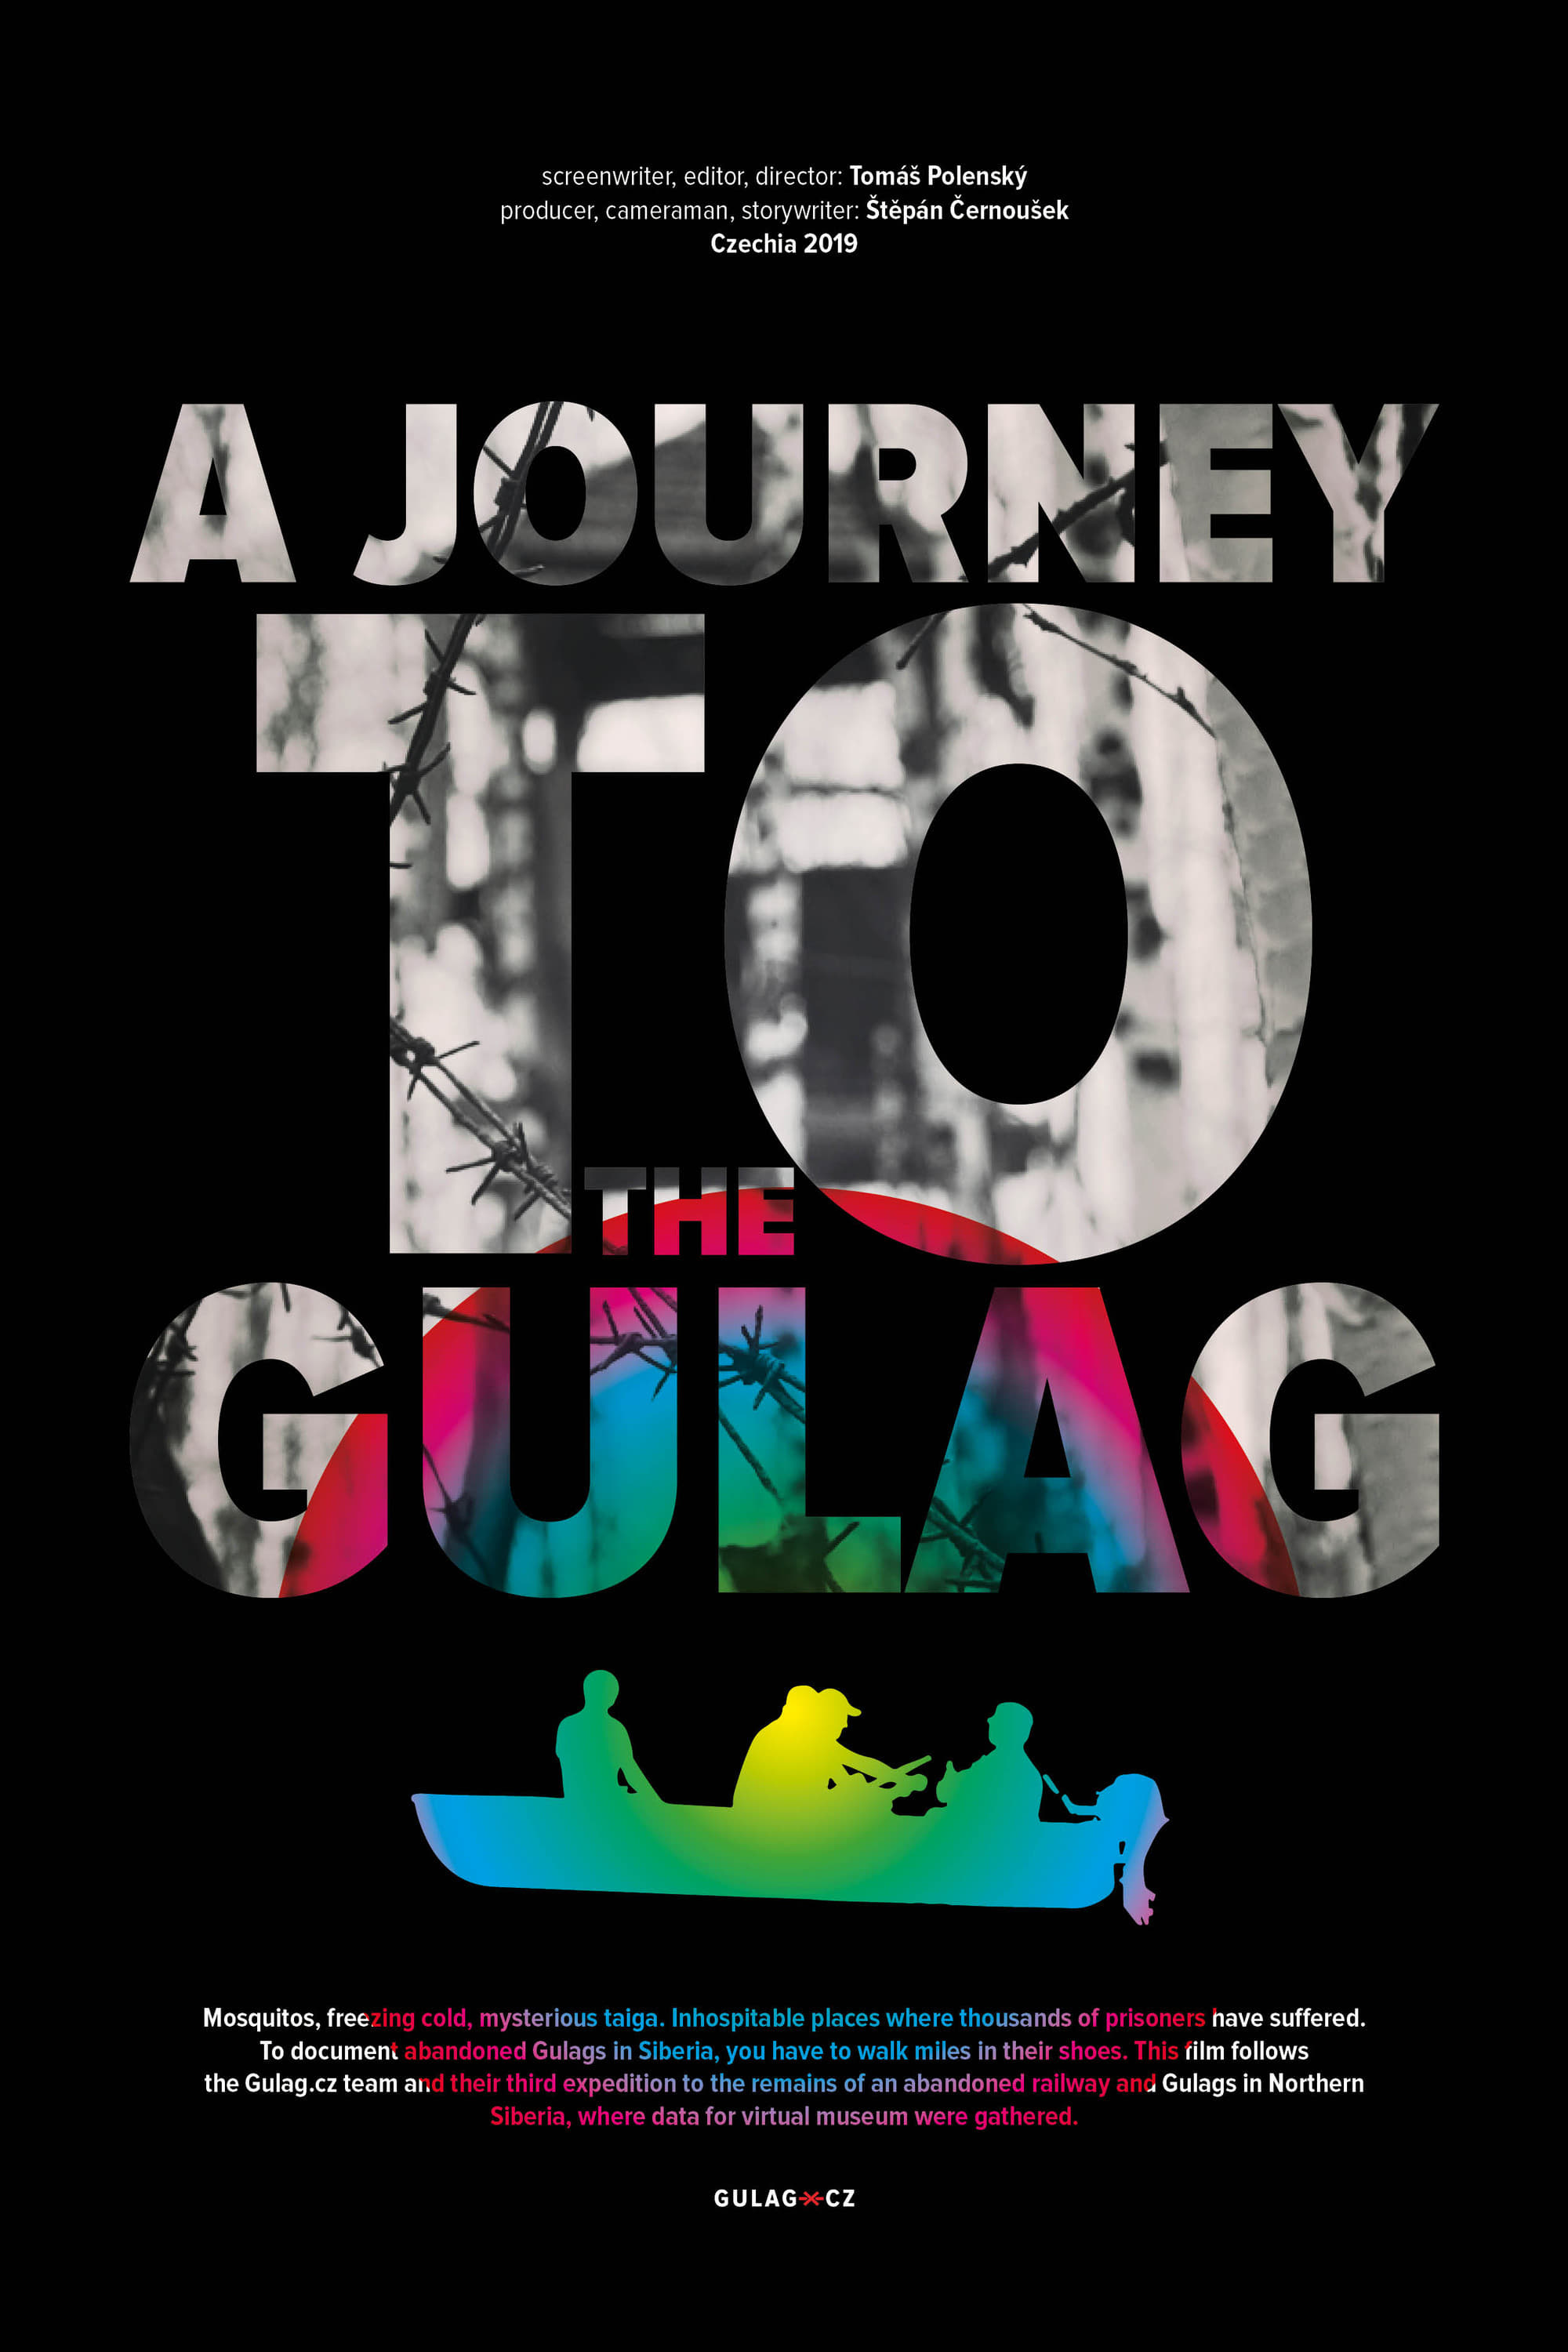 A Journey to the Gulag